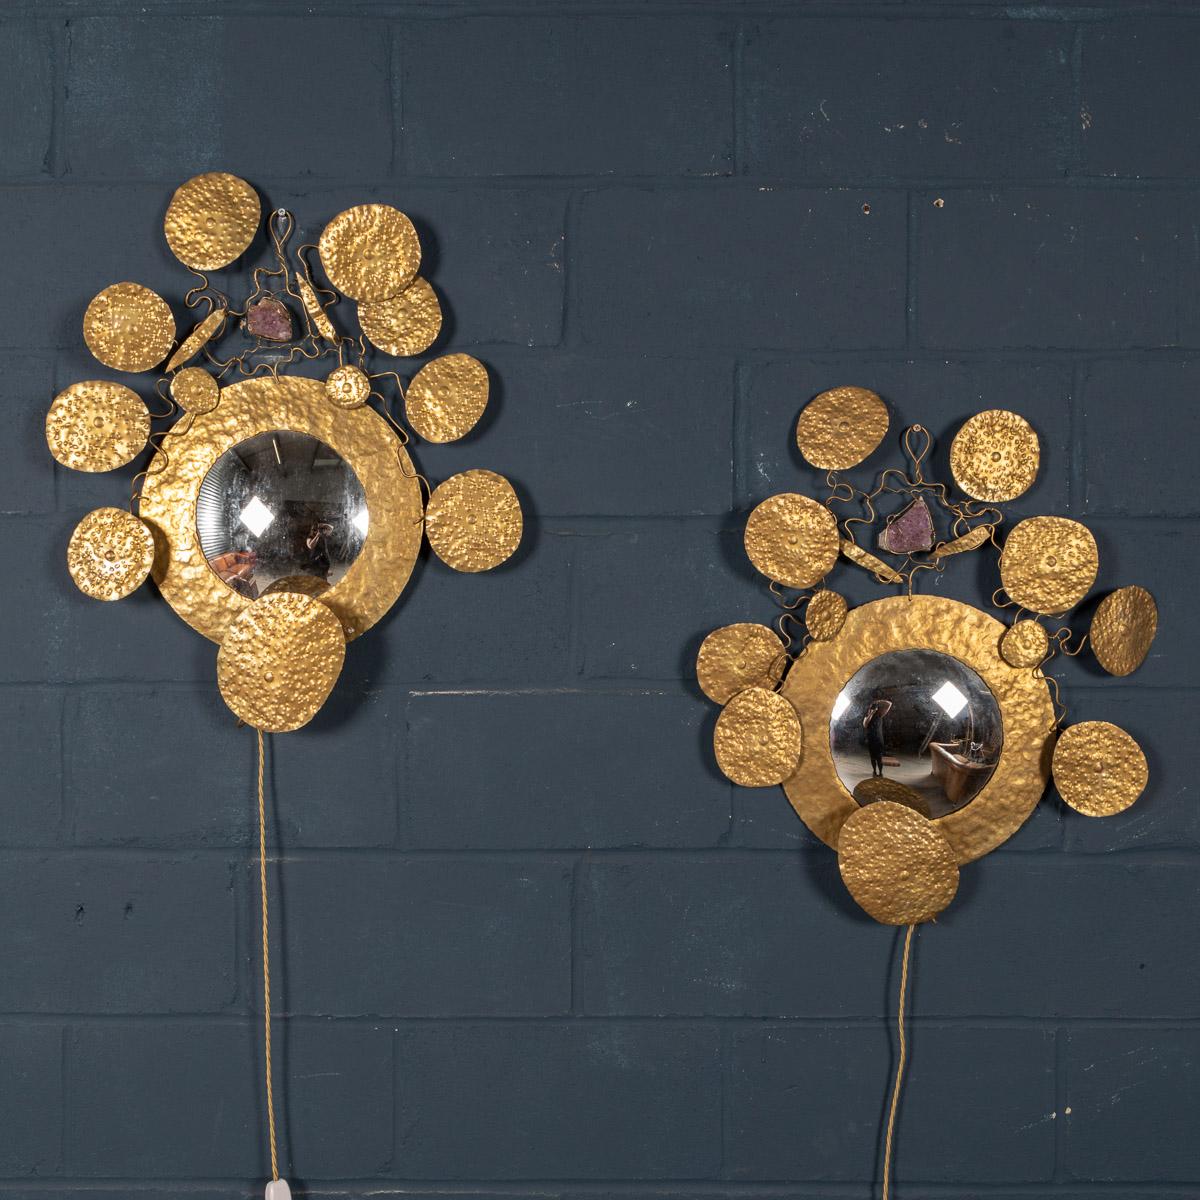 A fantastic pair of wall lights by Missoni, made in Italy around 1980. A round convex mirror surrounded by leaves of naturalistic form made in hammered brass, amethyst blocks to the top and light fittings to the bottom. An extremely eccentric item